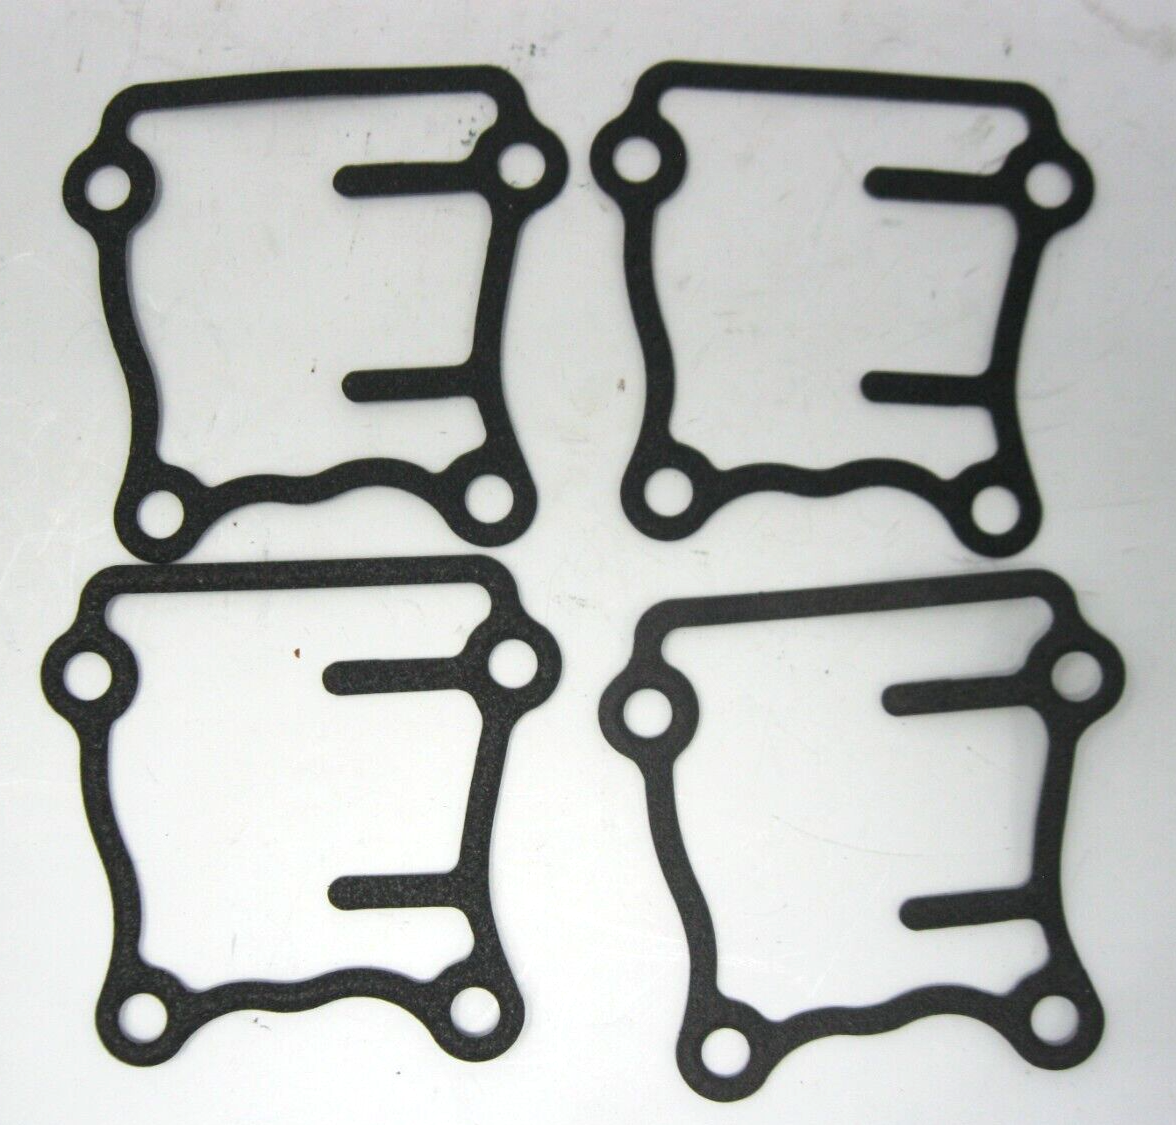 Harley-Davidson 04-17 Softail, Dyna, Touring Tappet  Gaskets (4-Pack) 18635-99B